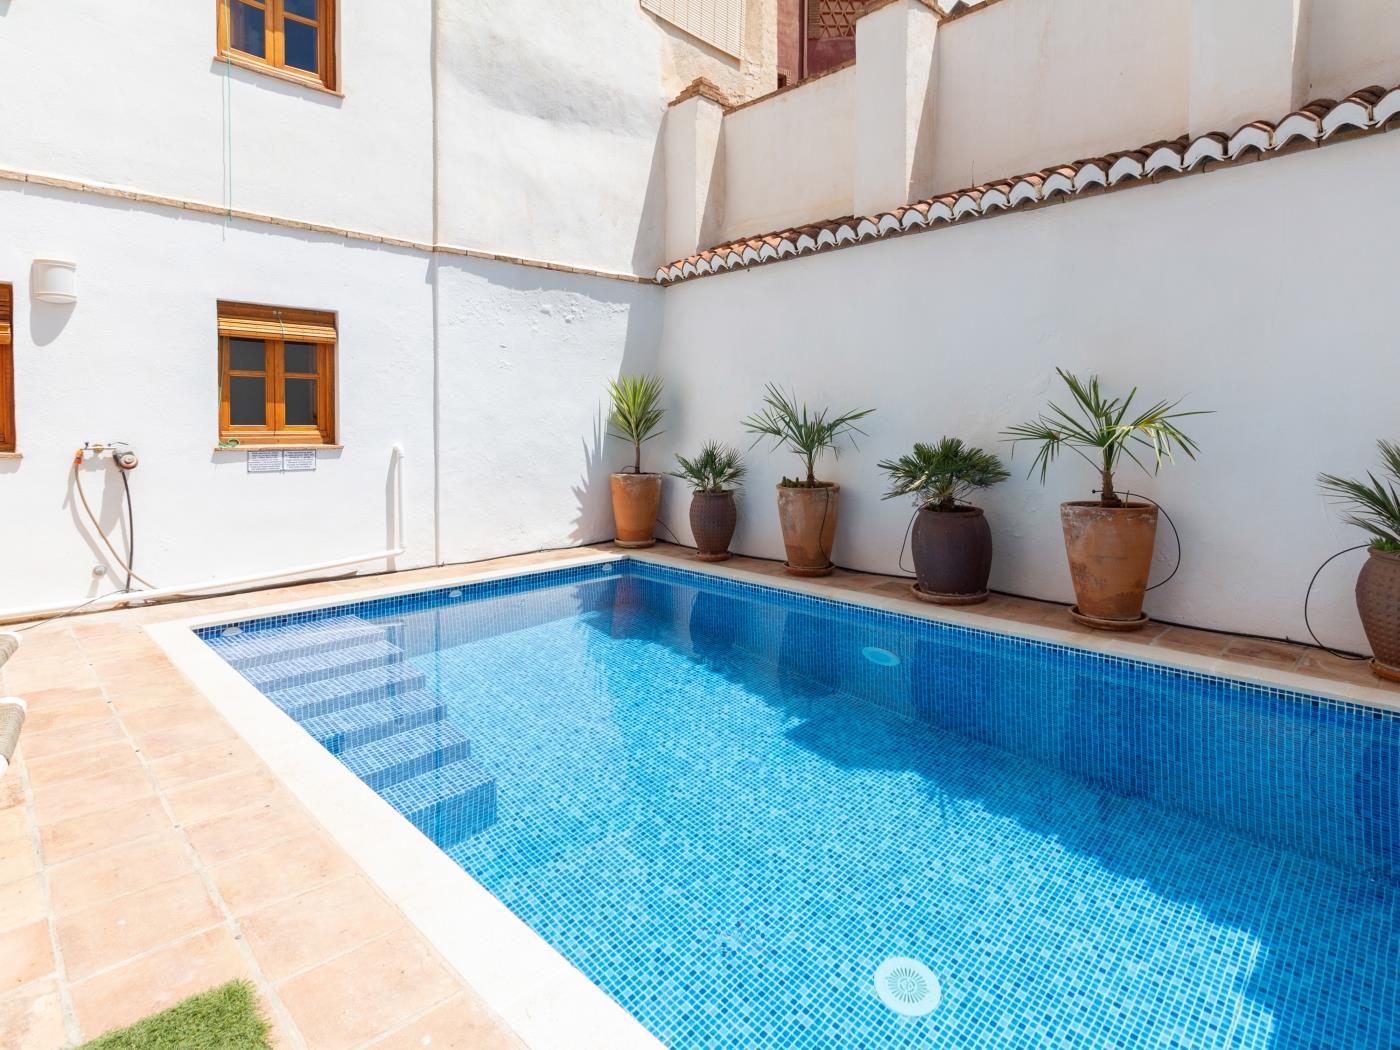 House with private pool and Andalusian style in Albuñuelas